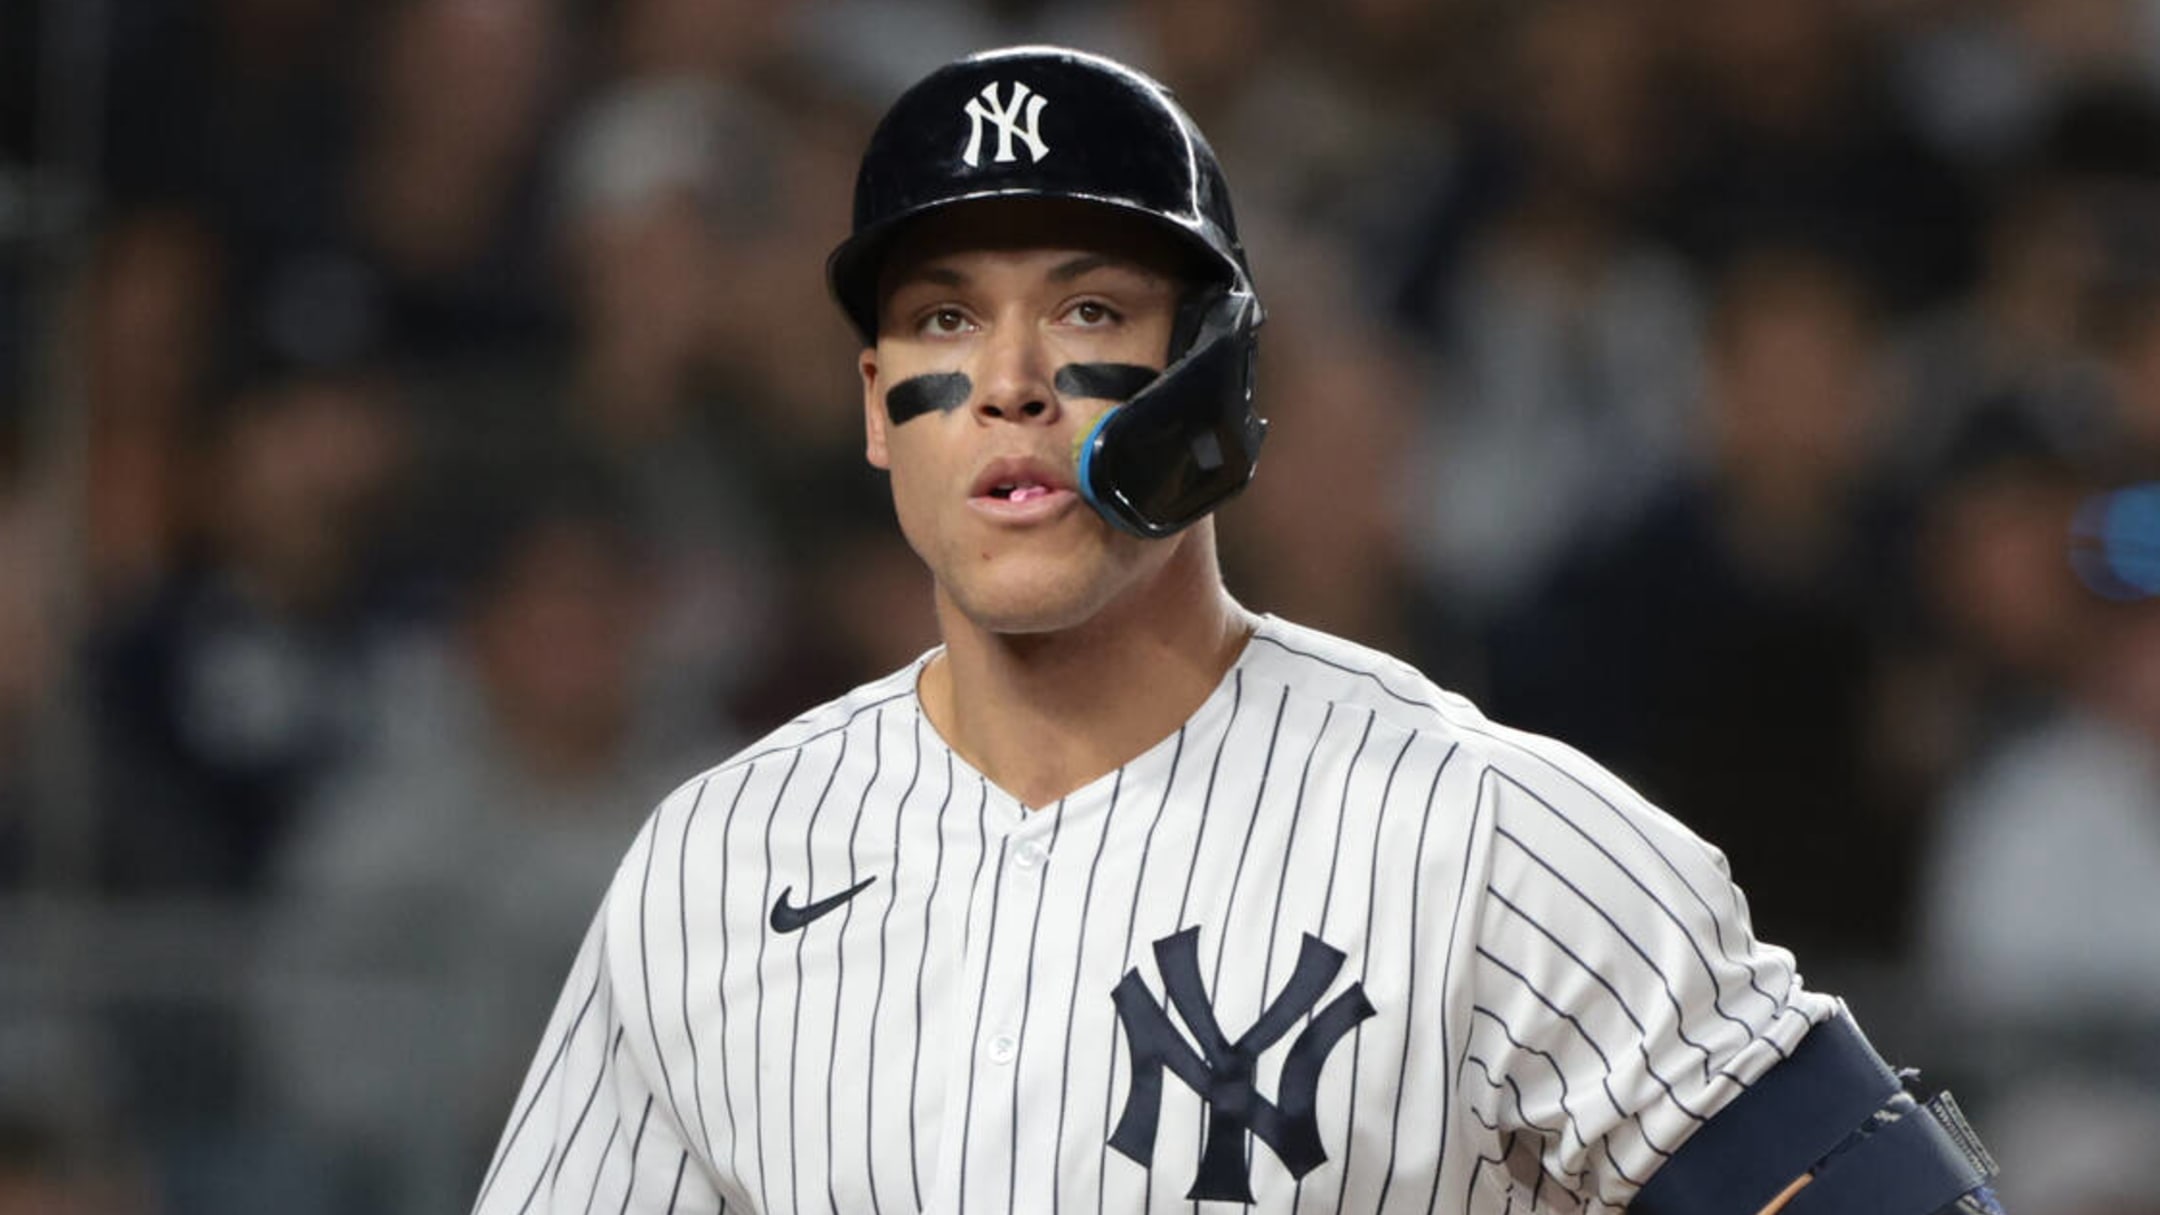 Aaron Judge praised for 'creating' Anthony Rizzo HR in win